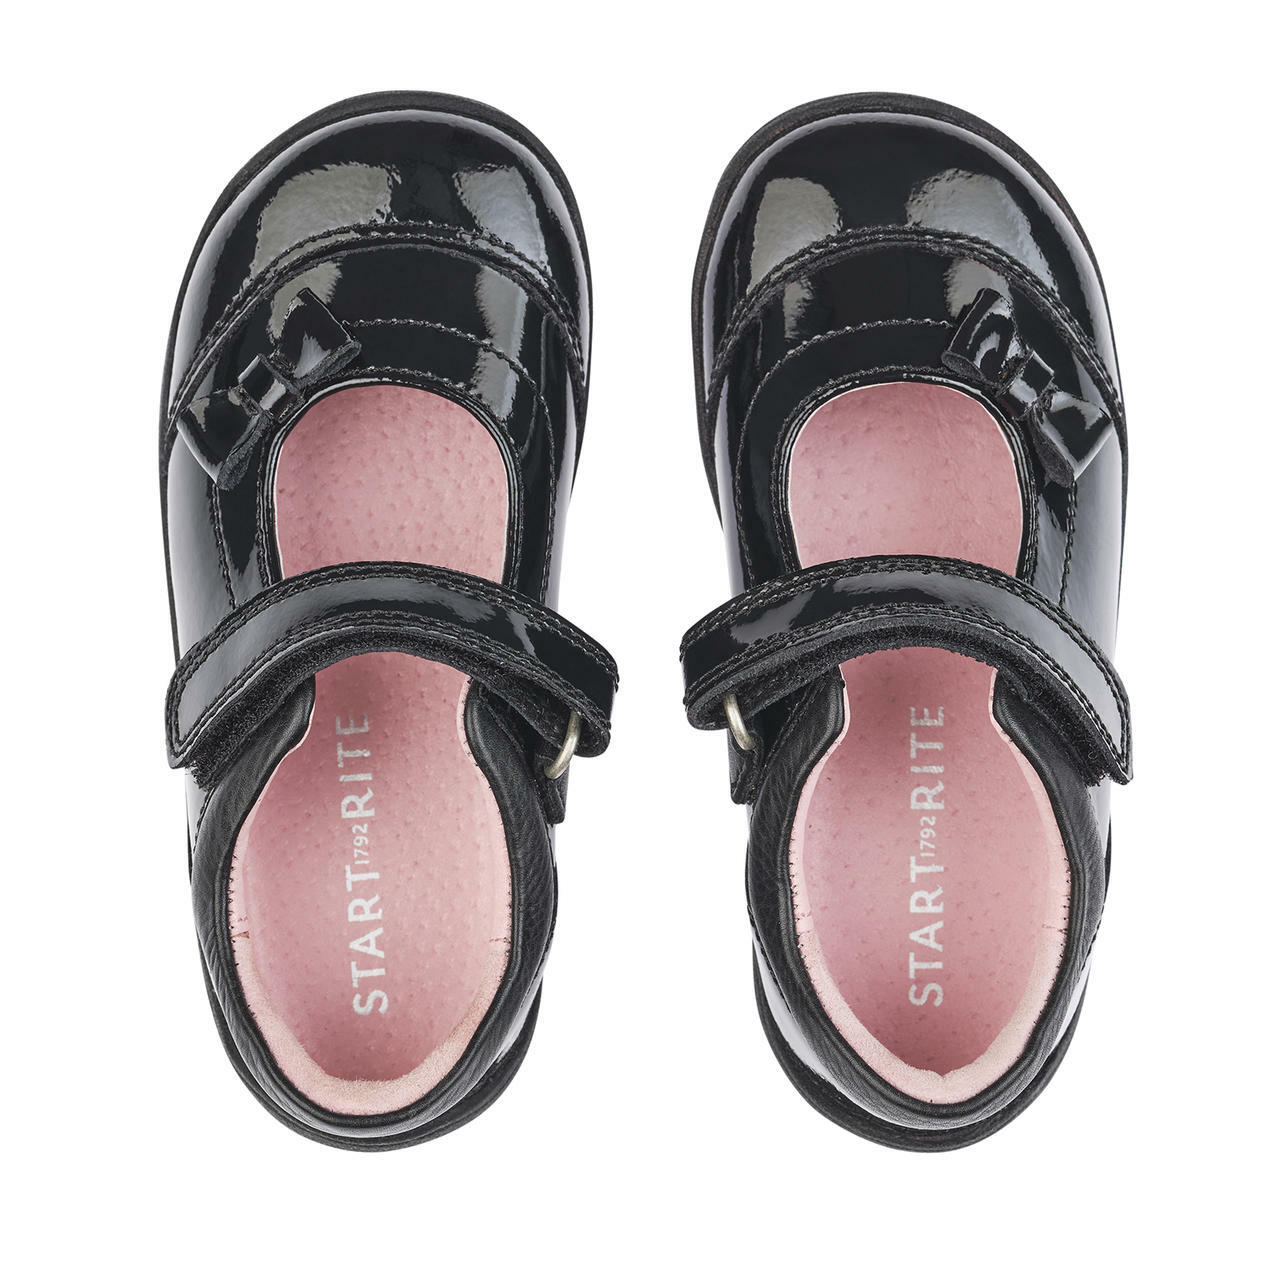 A pair of girls pre school shoes by Start Rite, style Twizzle, in black patent with velcro fastening. Above view.